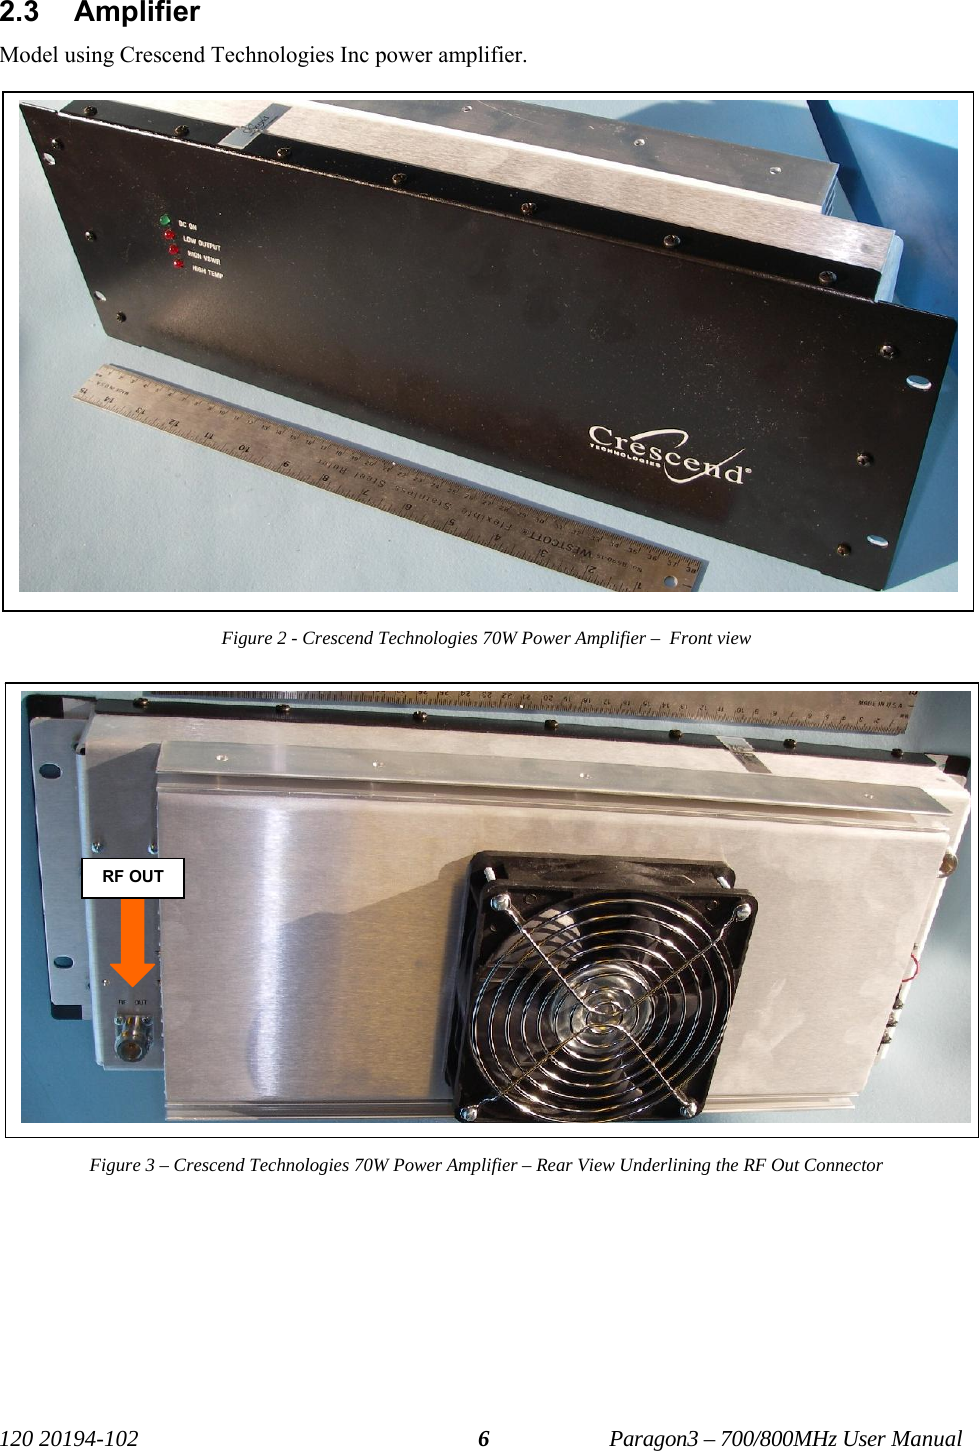   120 20194-102   Paragon3 – 700/800MHz User Manual 62.3 Amplifier Model using Crescend Technologies Inc power amplifier. Figure 2 - Crescend Technologies 70W Power Amplifier –  Front view Figure 3 – Crescend Technologies 70W Power Amplifier – Rear View Underlining the RF Out Connector  RF OUT 